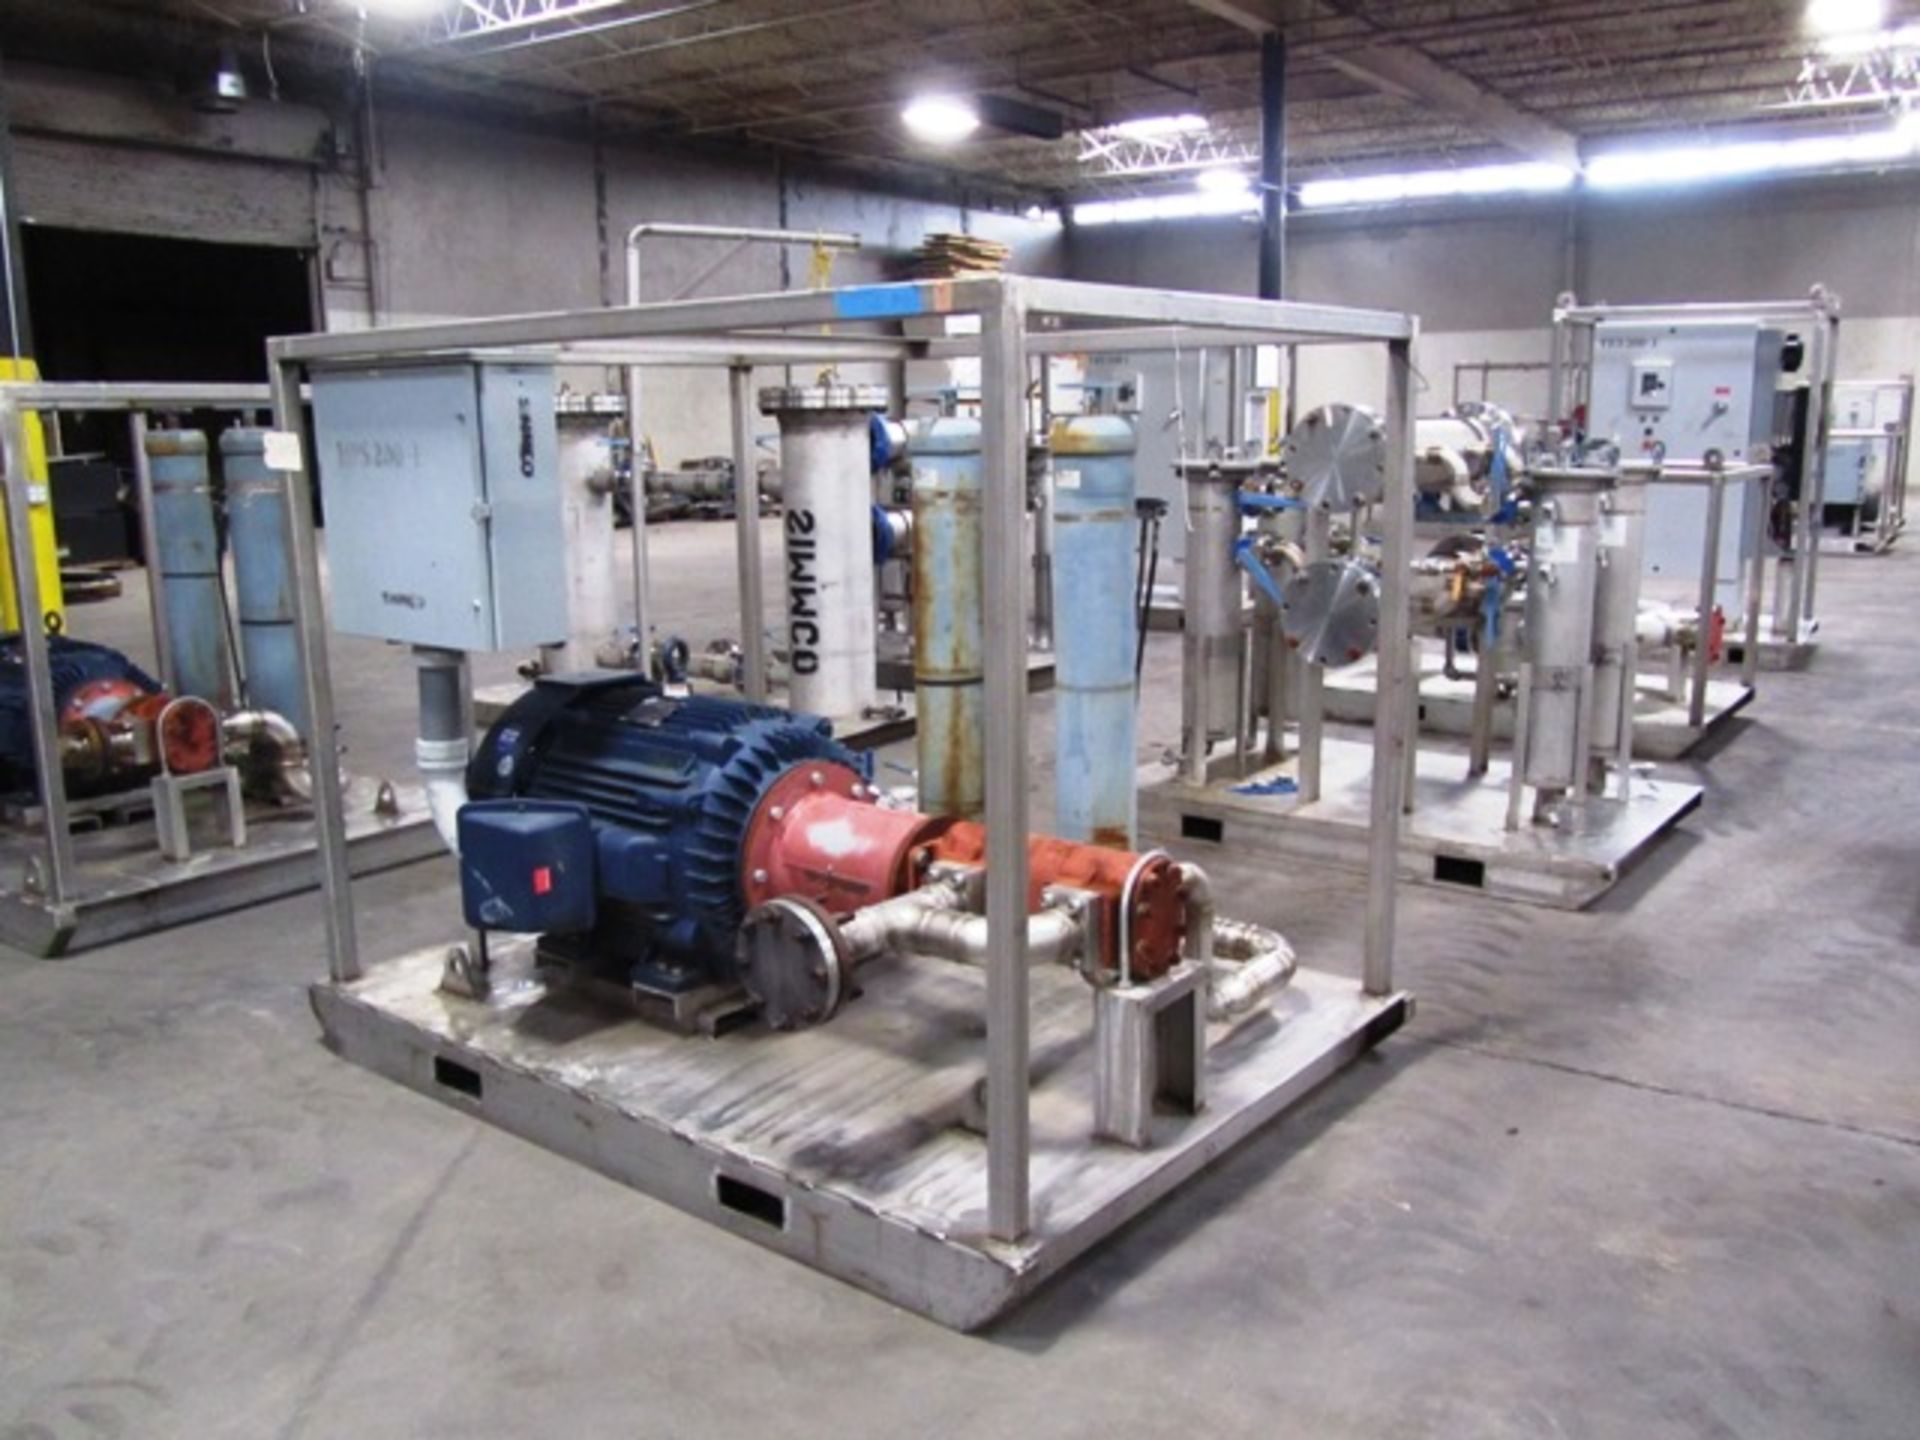 Oil / Water Bypass Pumping System consisting of 200 HP Motor, (2) Splitter Valve Stations,